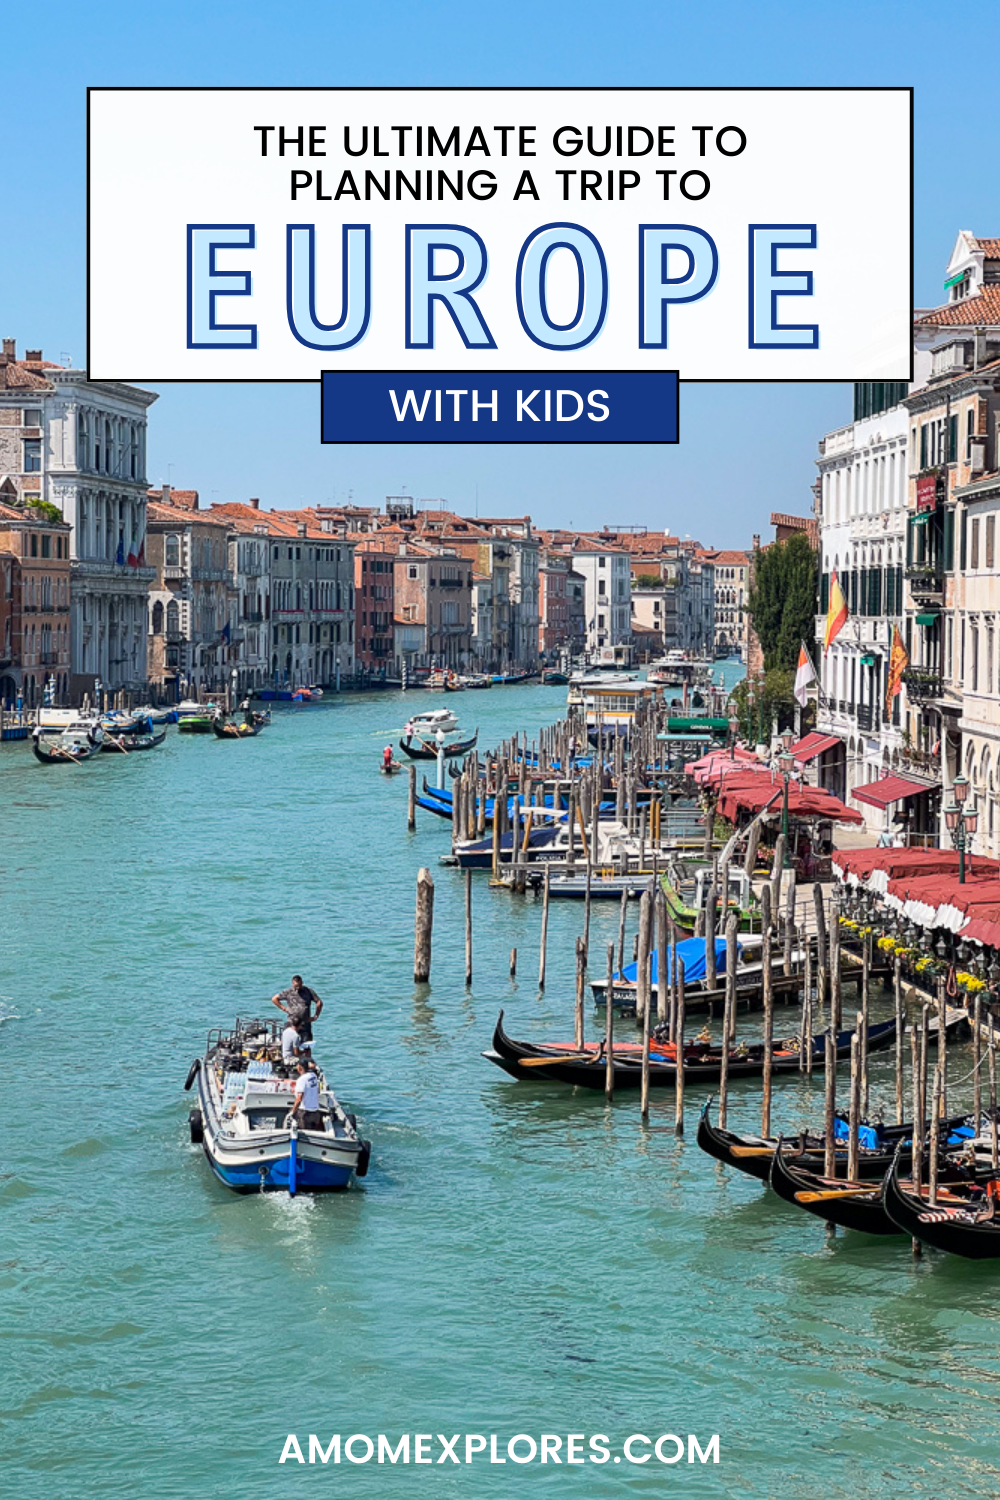 THE ULTIMATE GUIDE TO PLANNING A TRIP TO EUROPE WITH KIDS-2.png